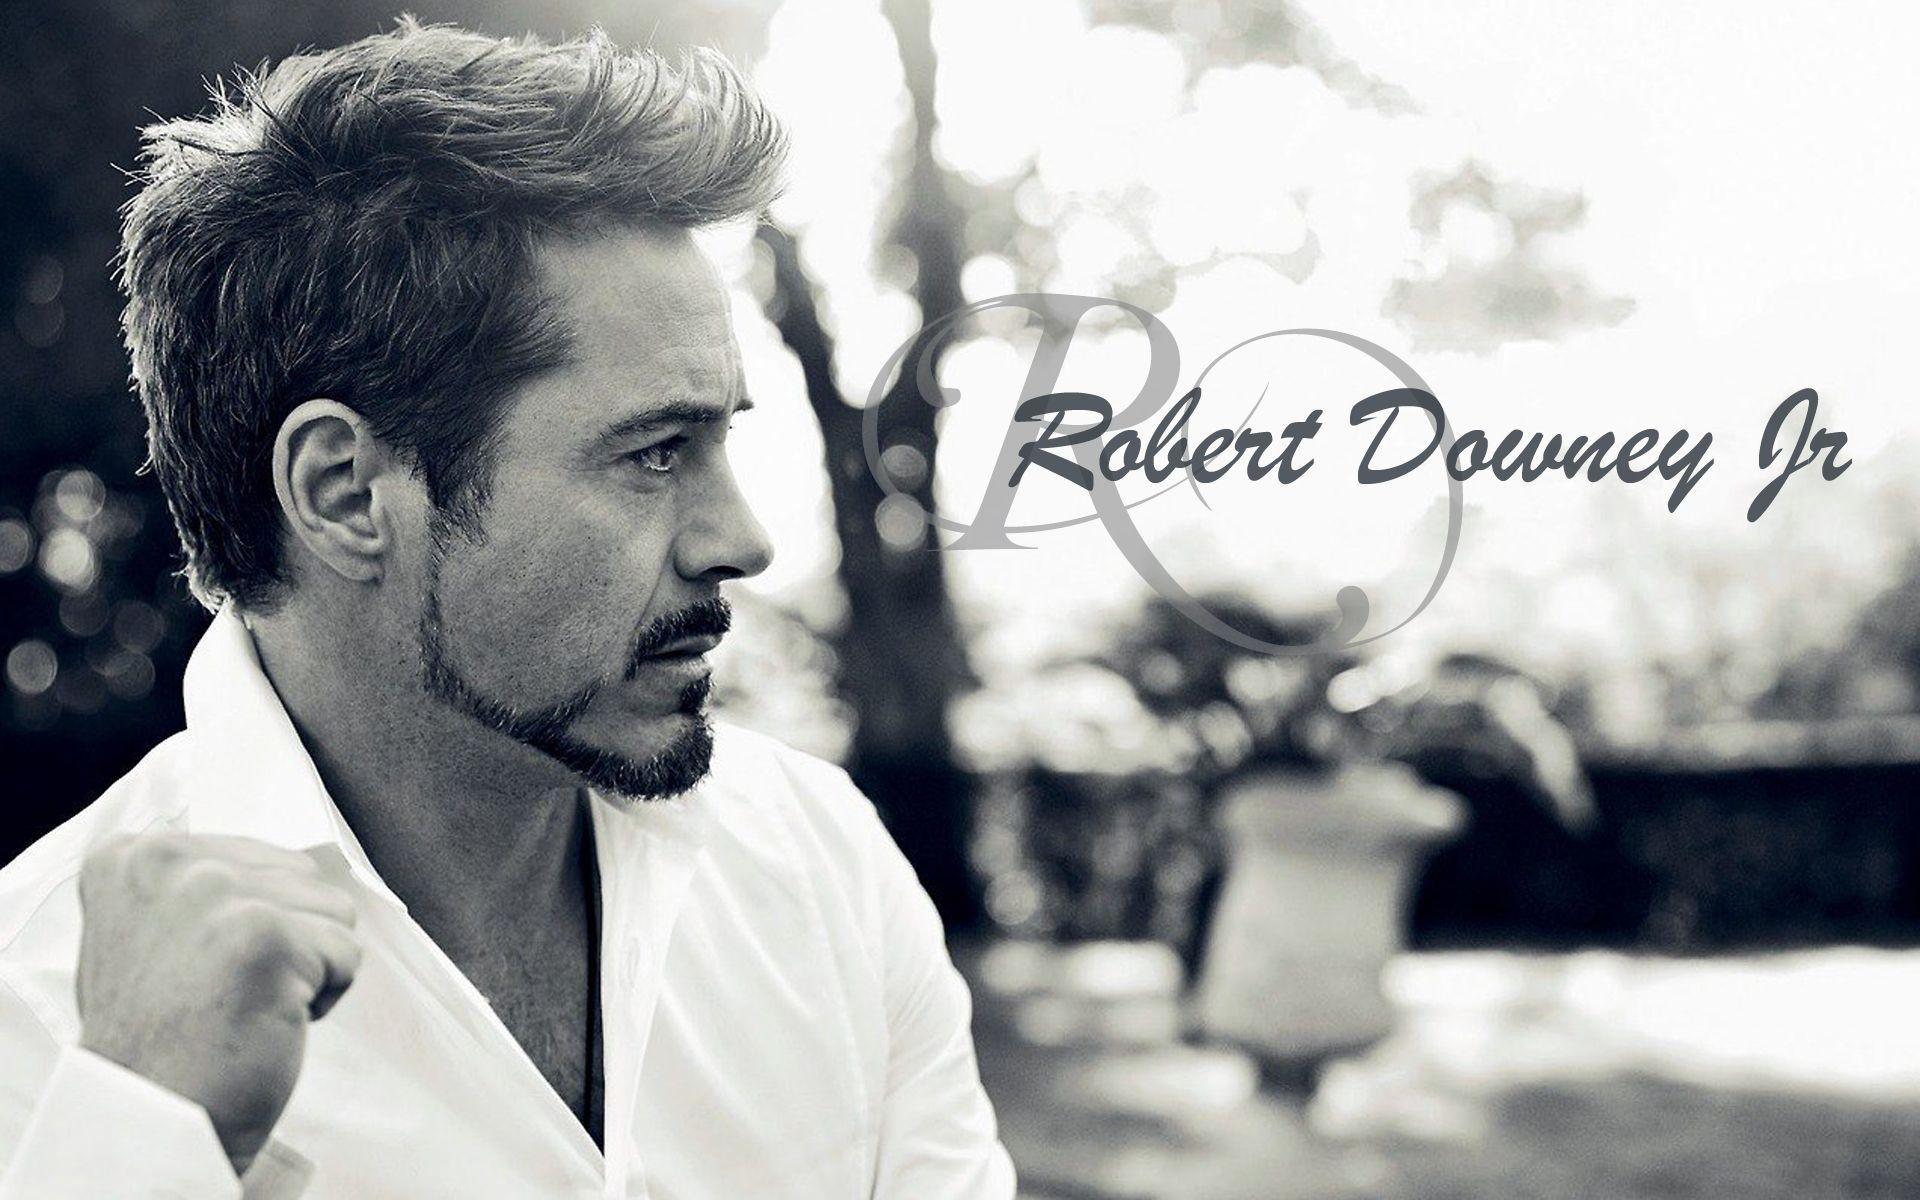 Robert Downey Jr Wallpaper High Resolution and Quality Download